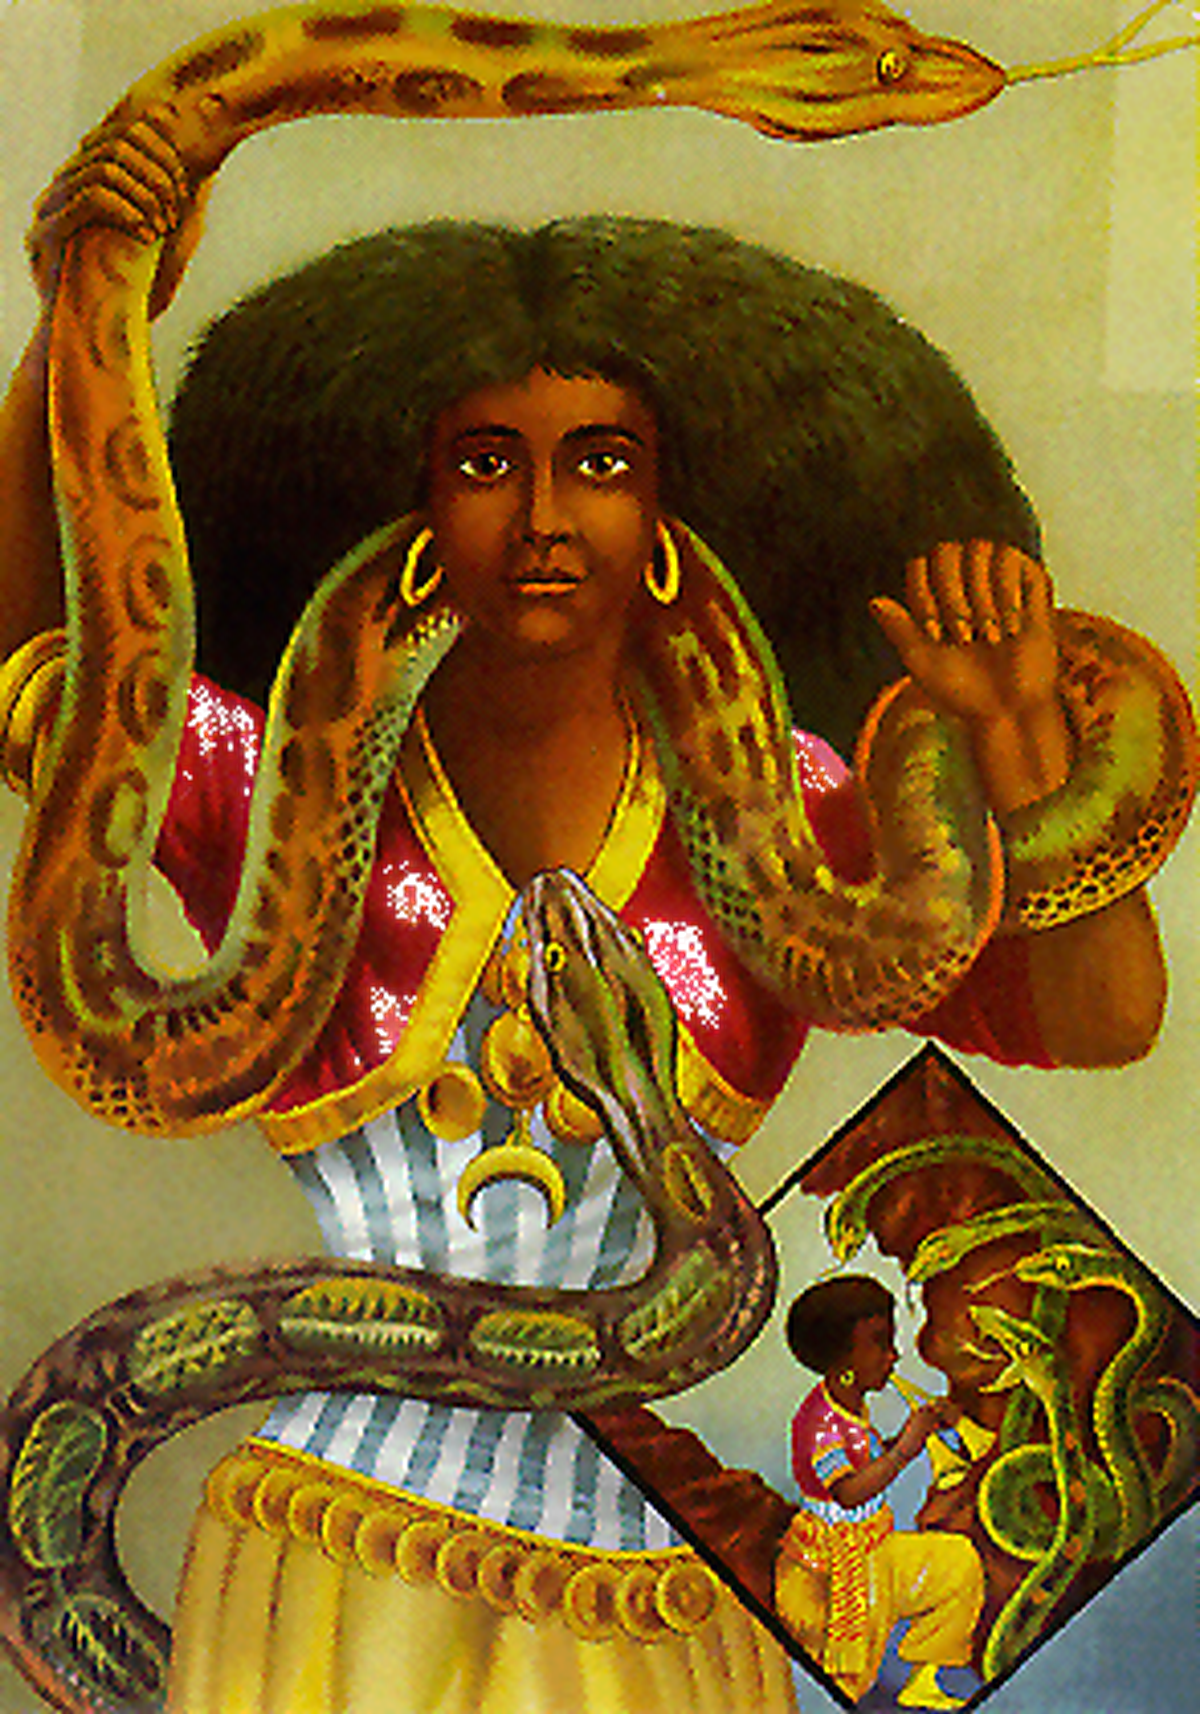 African sailors recognized the iconography of the water deity Mami Wata in this 1880s chromolithograph poster of the performer Maladamatjaute by the Adolph Friedlander Company in Hamburg and carried it worldwide, giving rise to the common image of the deity in Africa and in the African diaspora.  (Courtesy of the Adolph Friedlander Company )